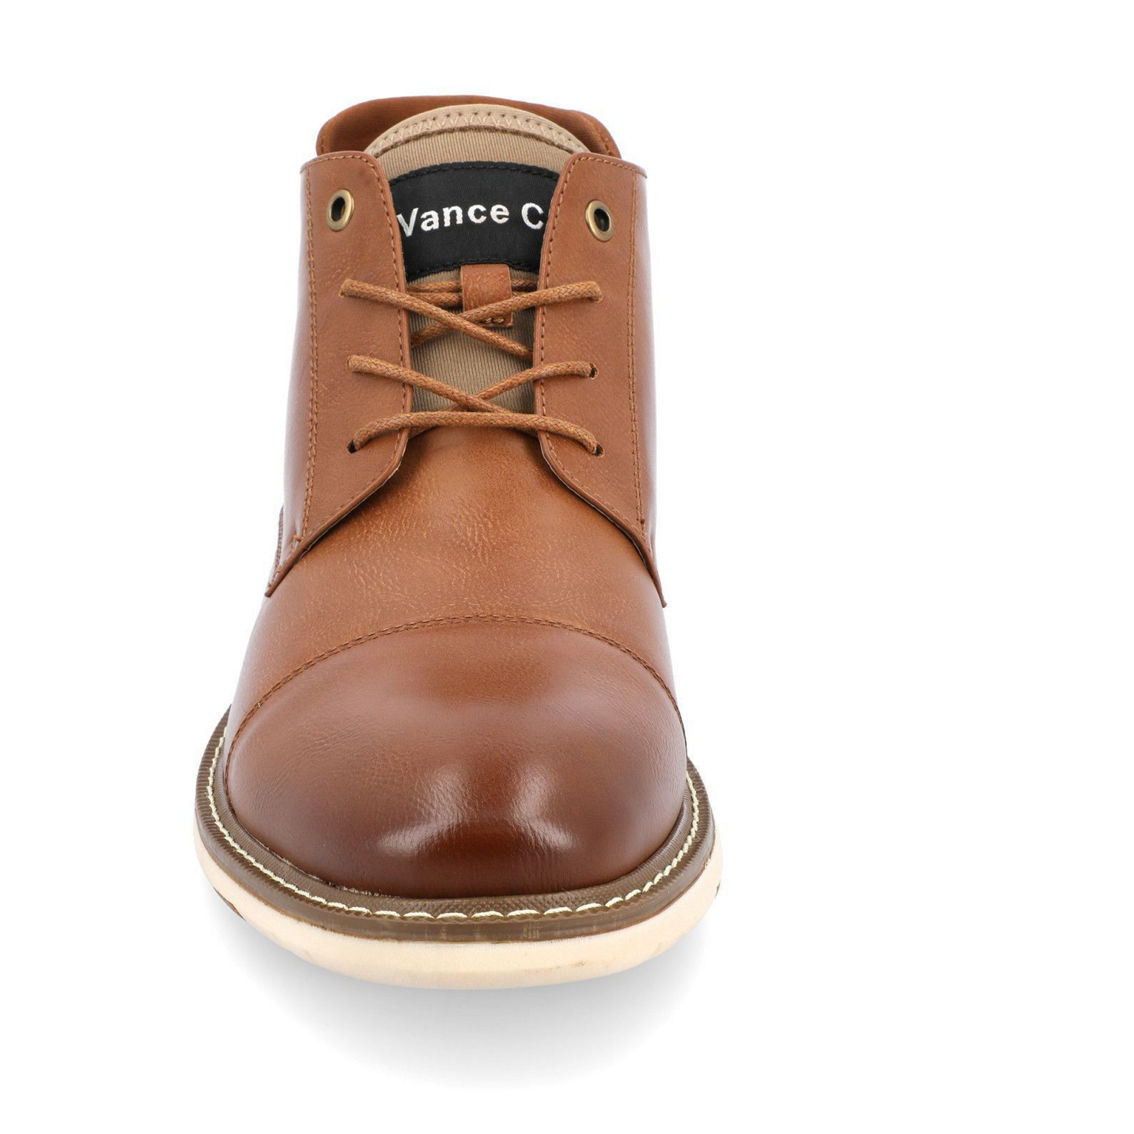 Vance Co. Redford Lace-up Hybrid Chukka Boot - Image 2 of 5